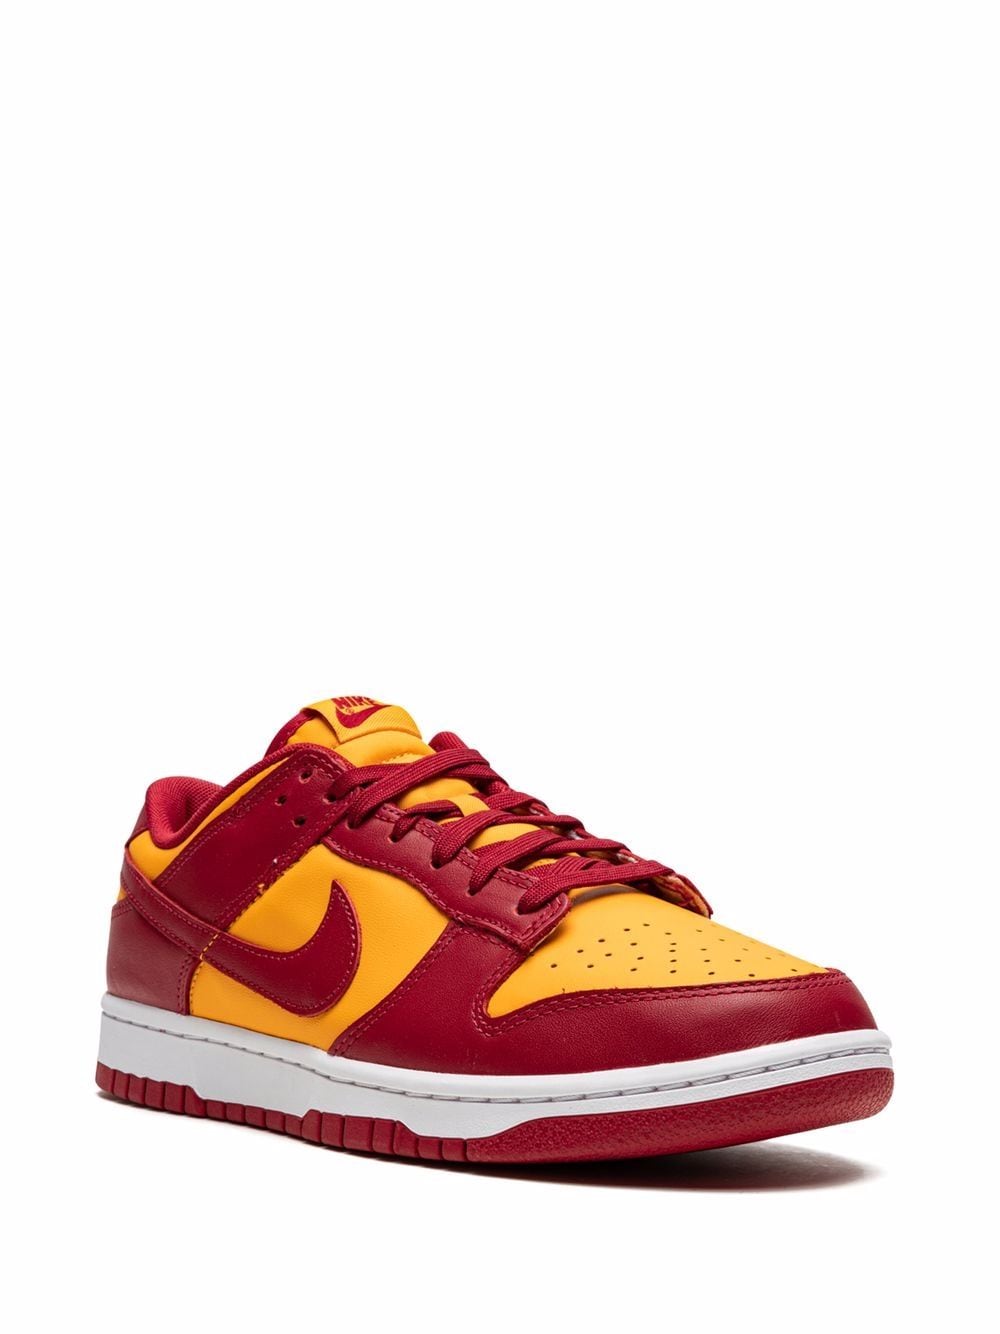 nike dunk yellow red